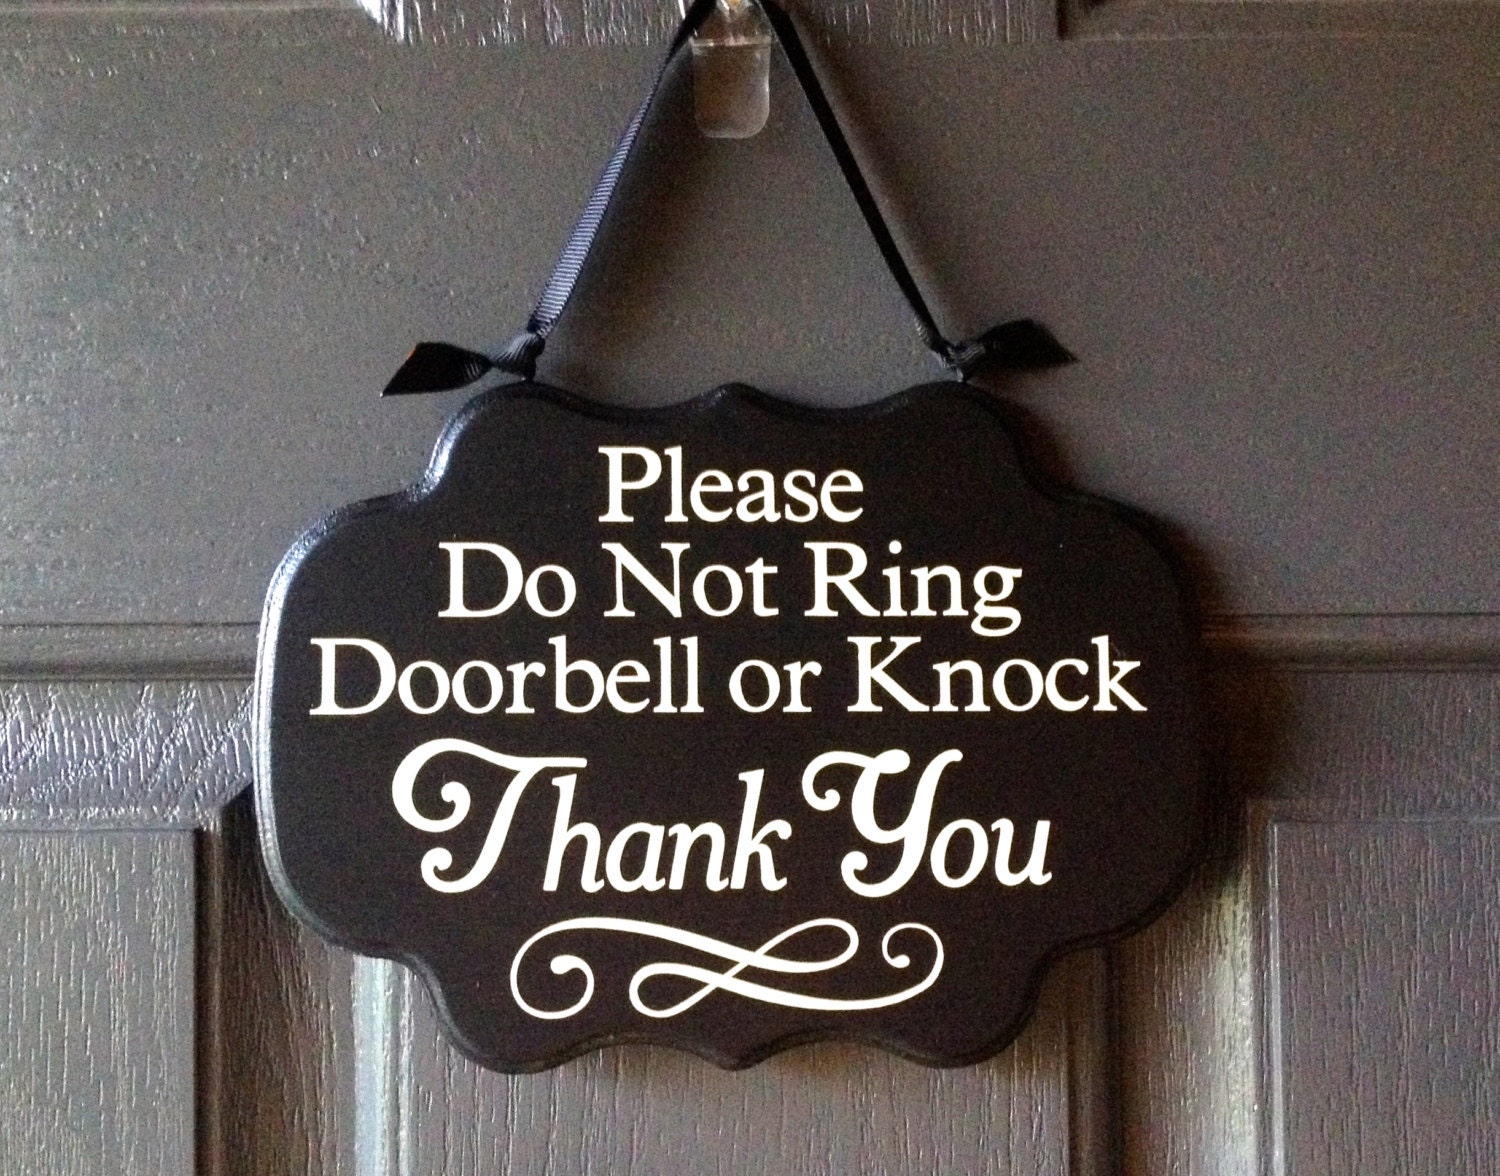 Please Do Not Ring Doorbell or Knock Thank You sign by HandyMomma